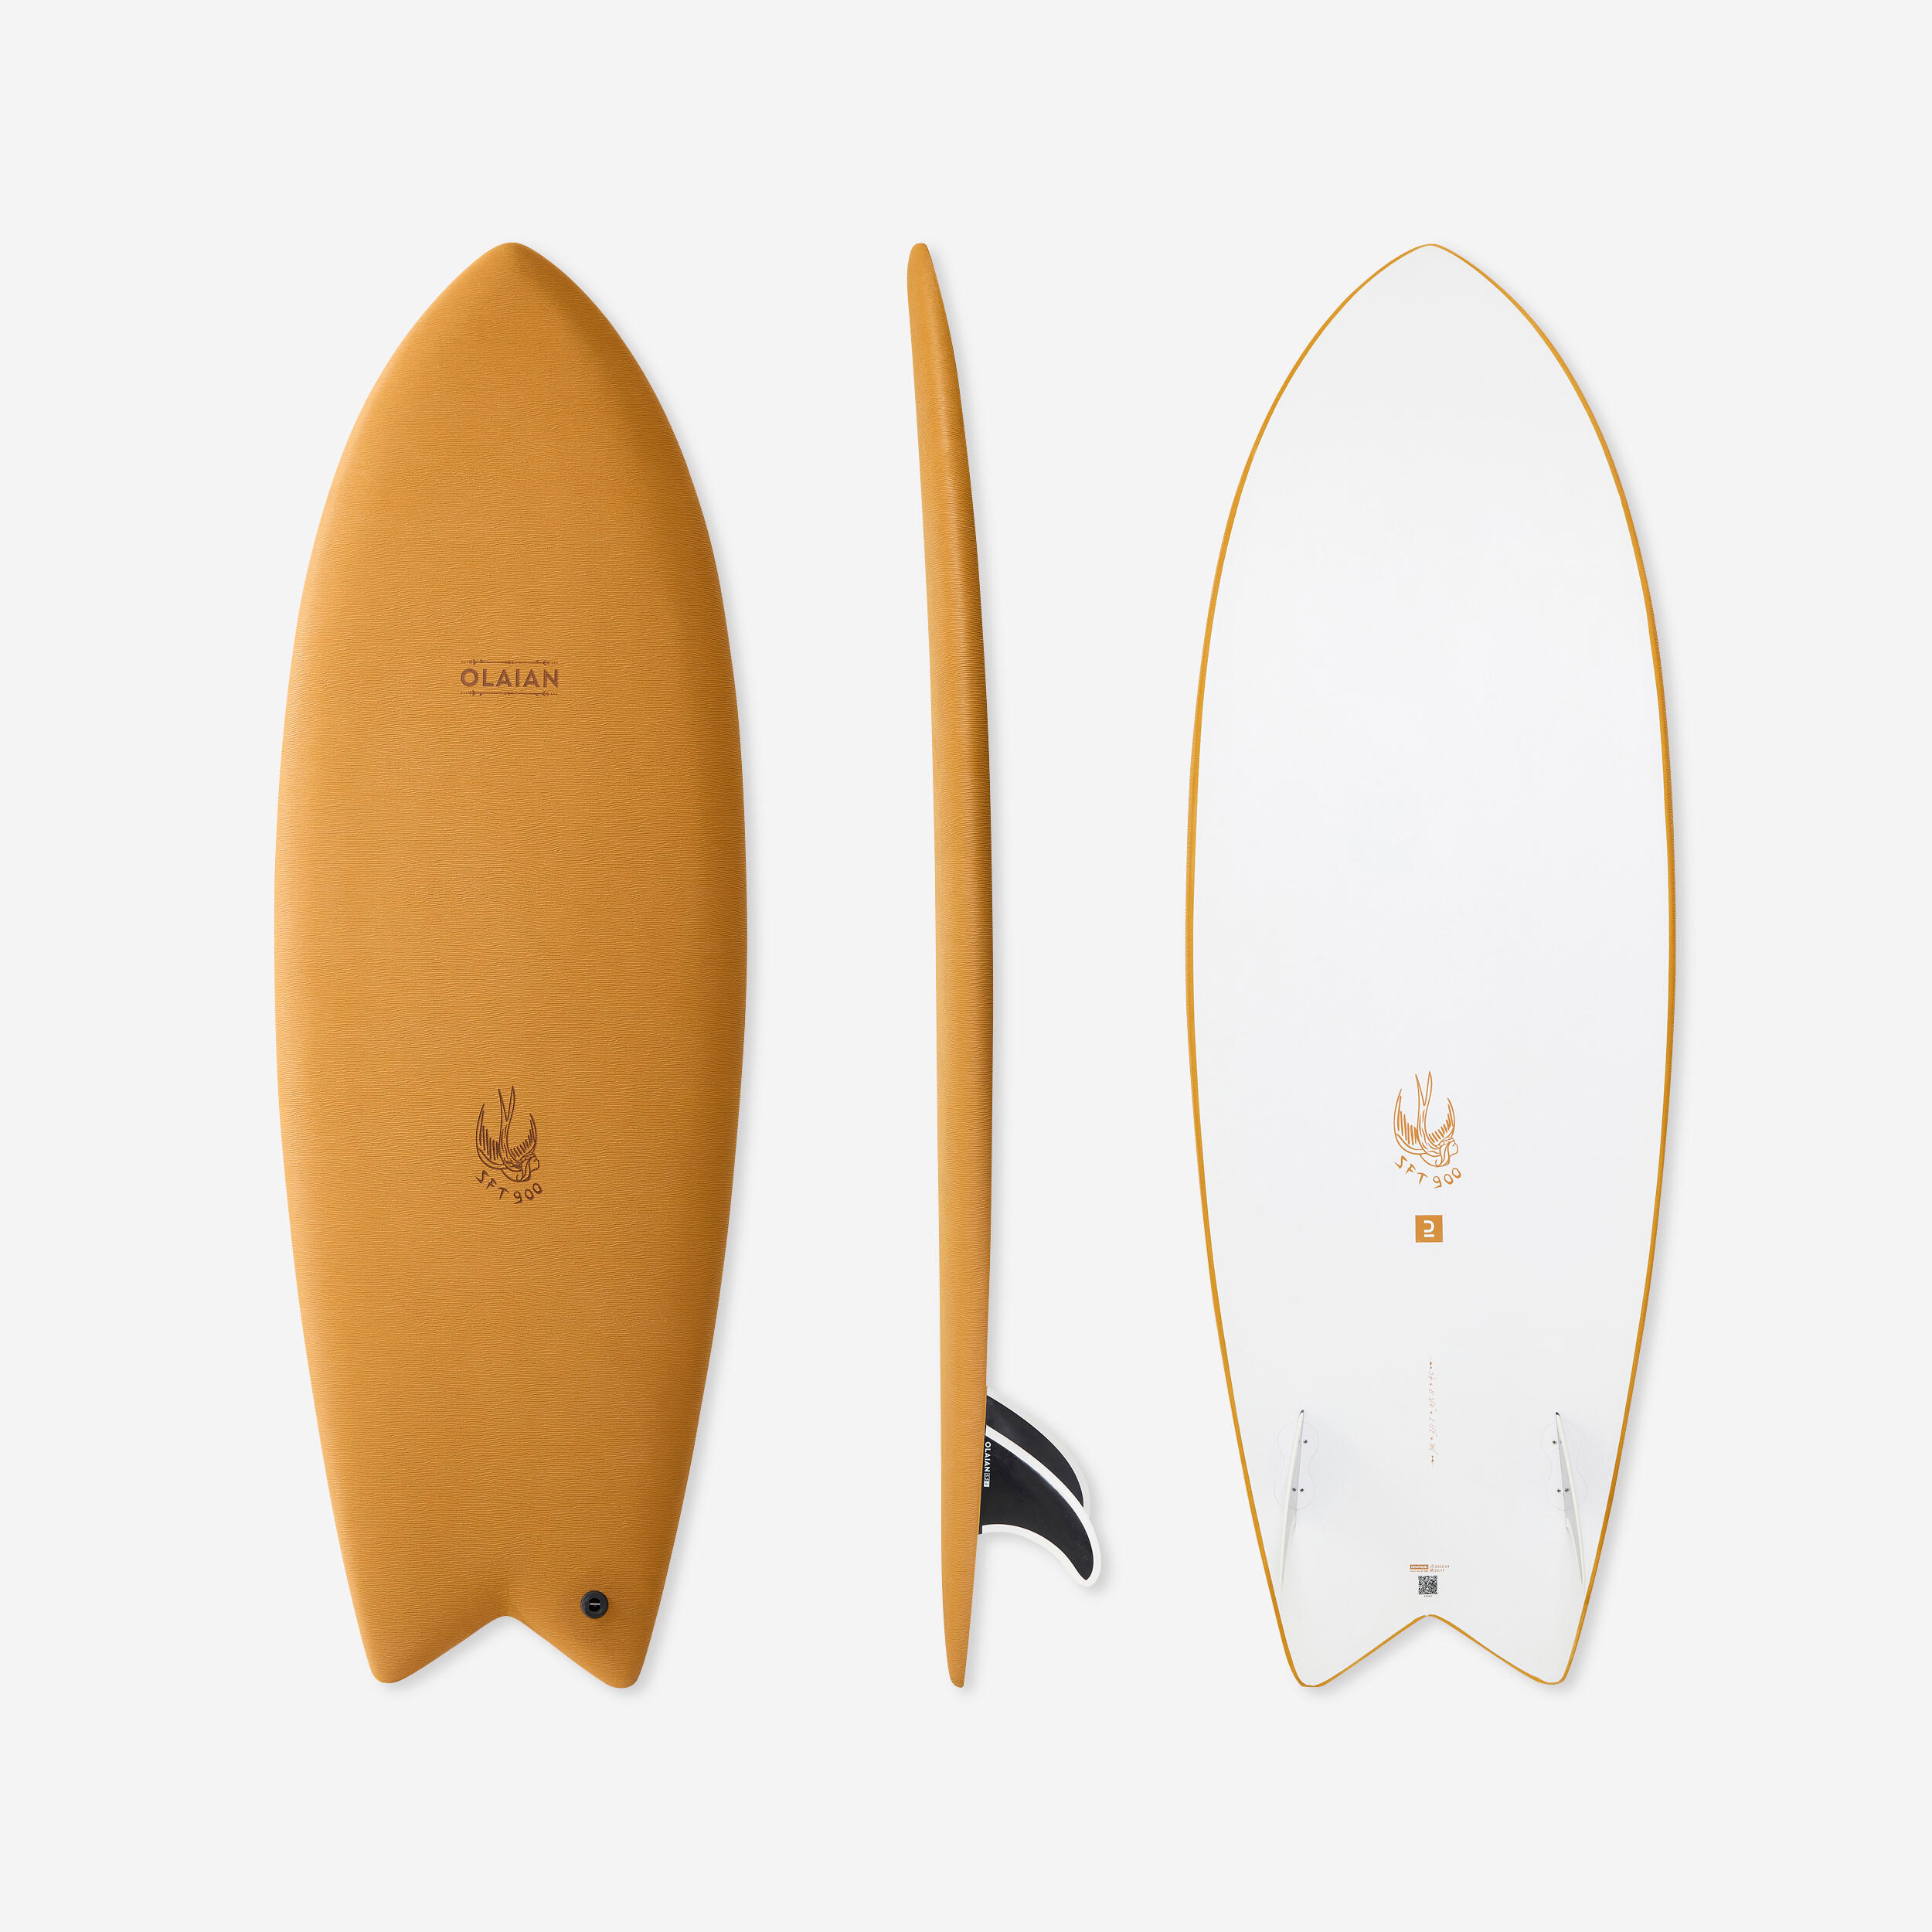 OLAIAN SURF 900 EPOXY SOFT 5'6 - comes with 2 fins